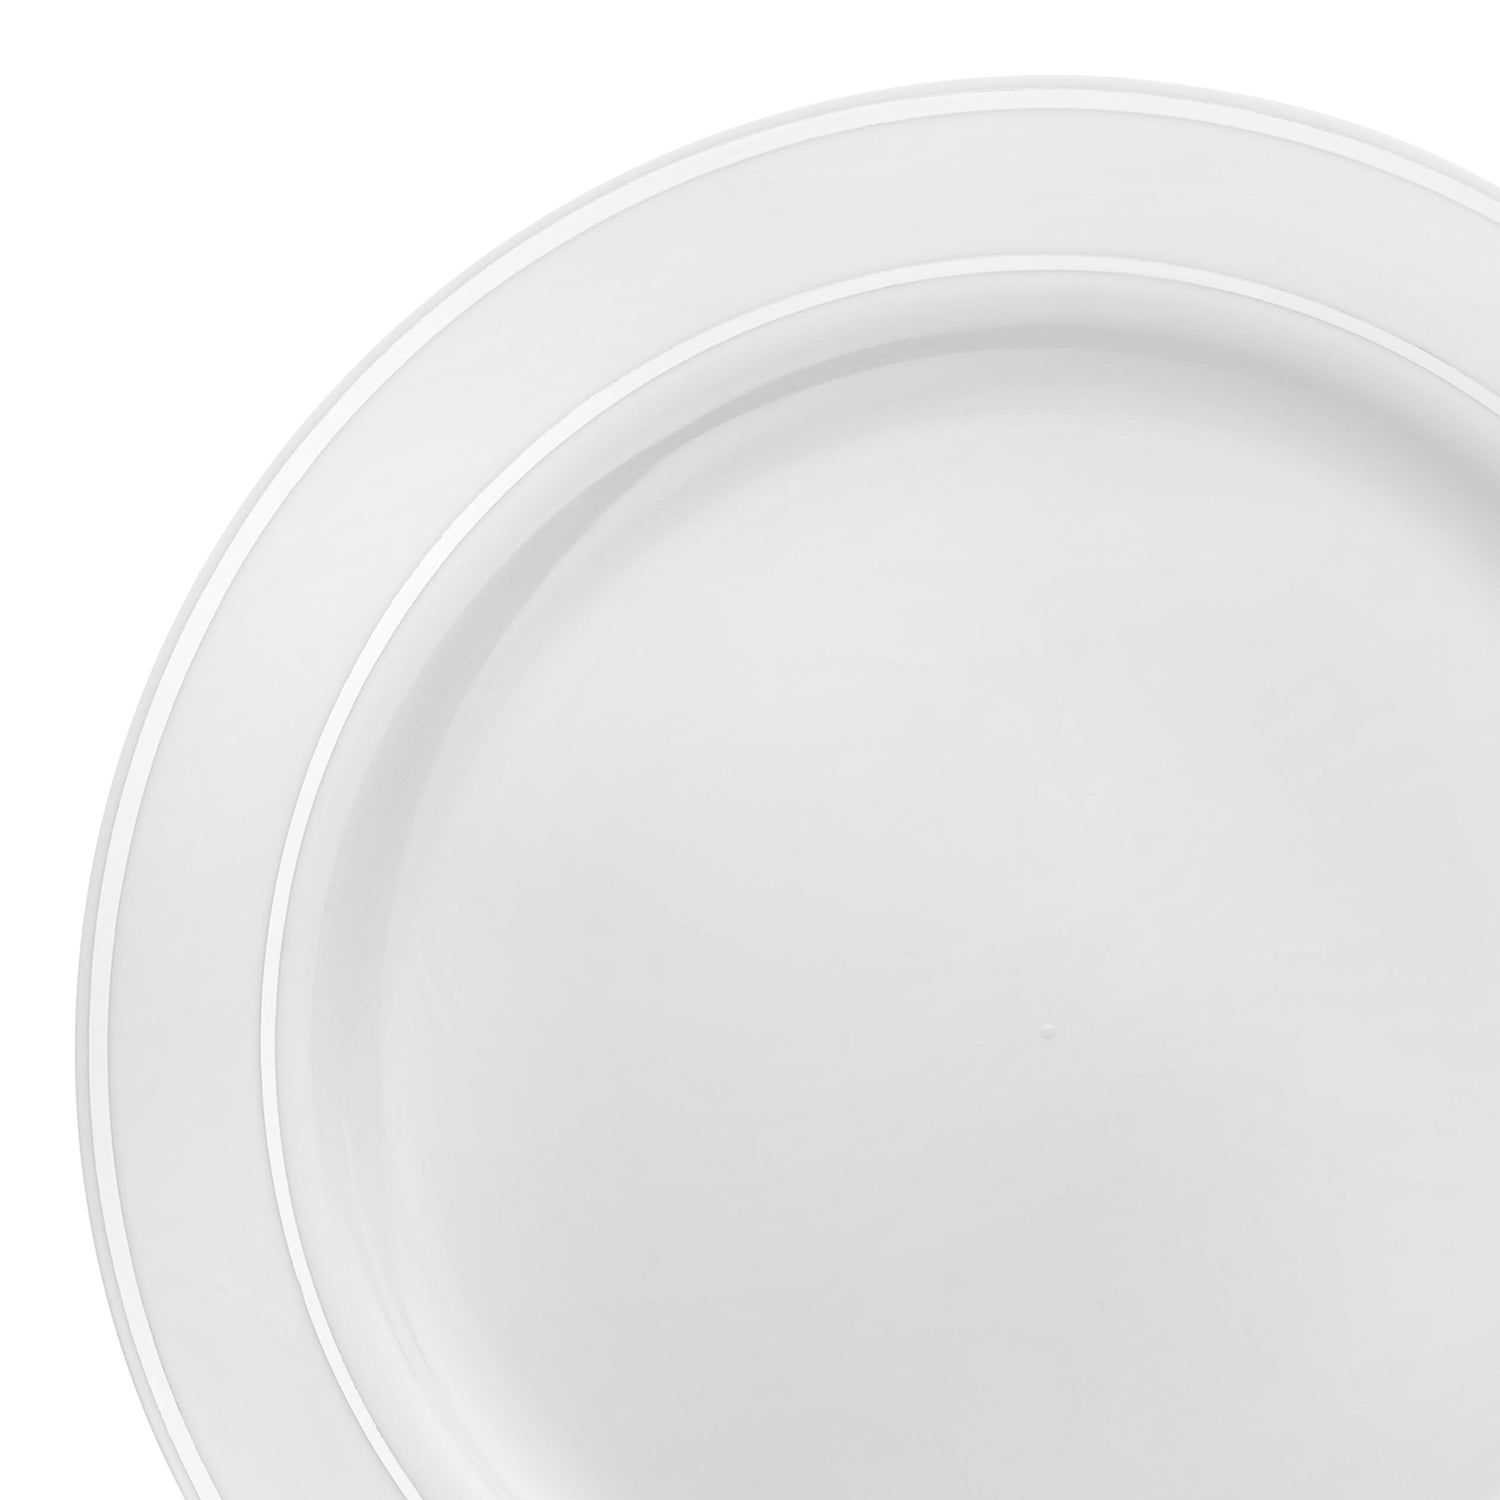 White with Silver Edge Rim Plastic Dinner Plates (10.25") | The Kaya Collection